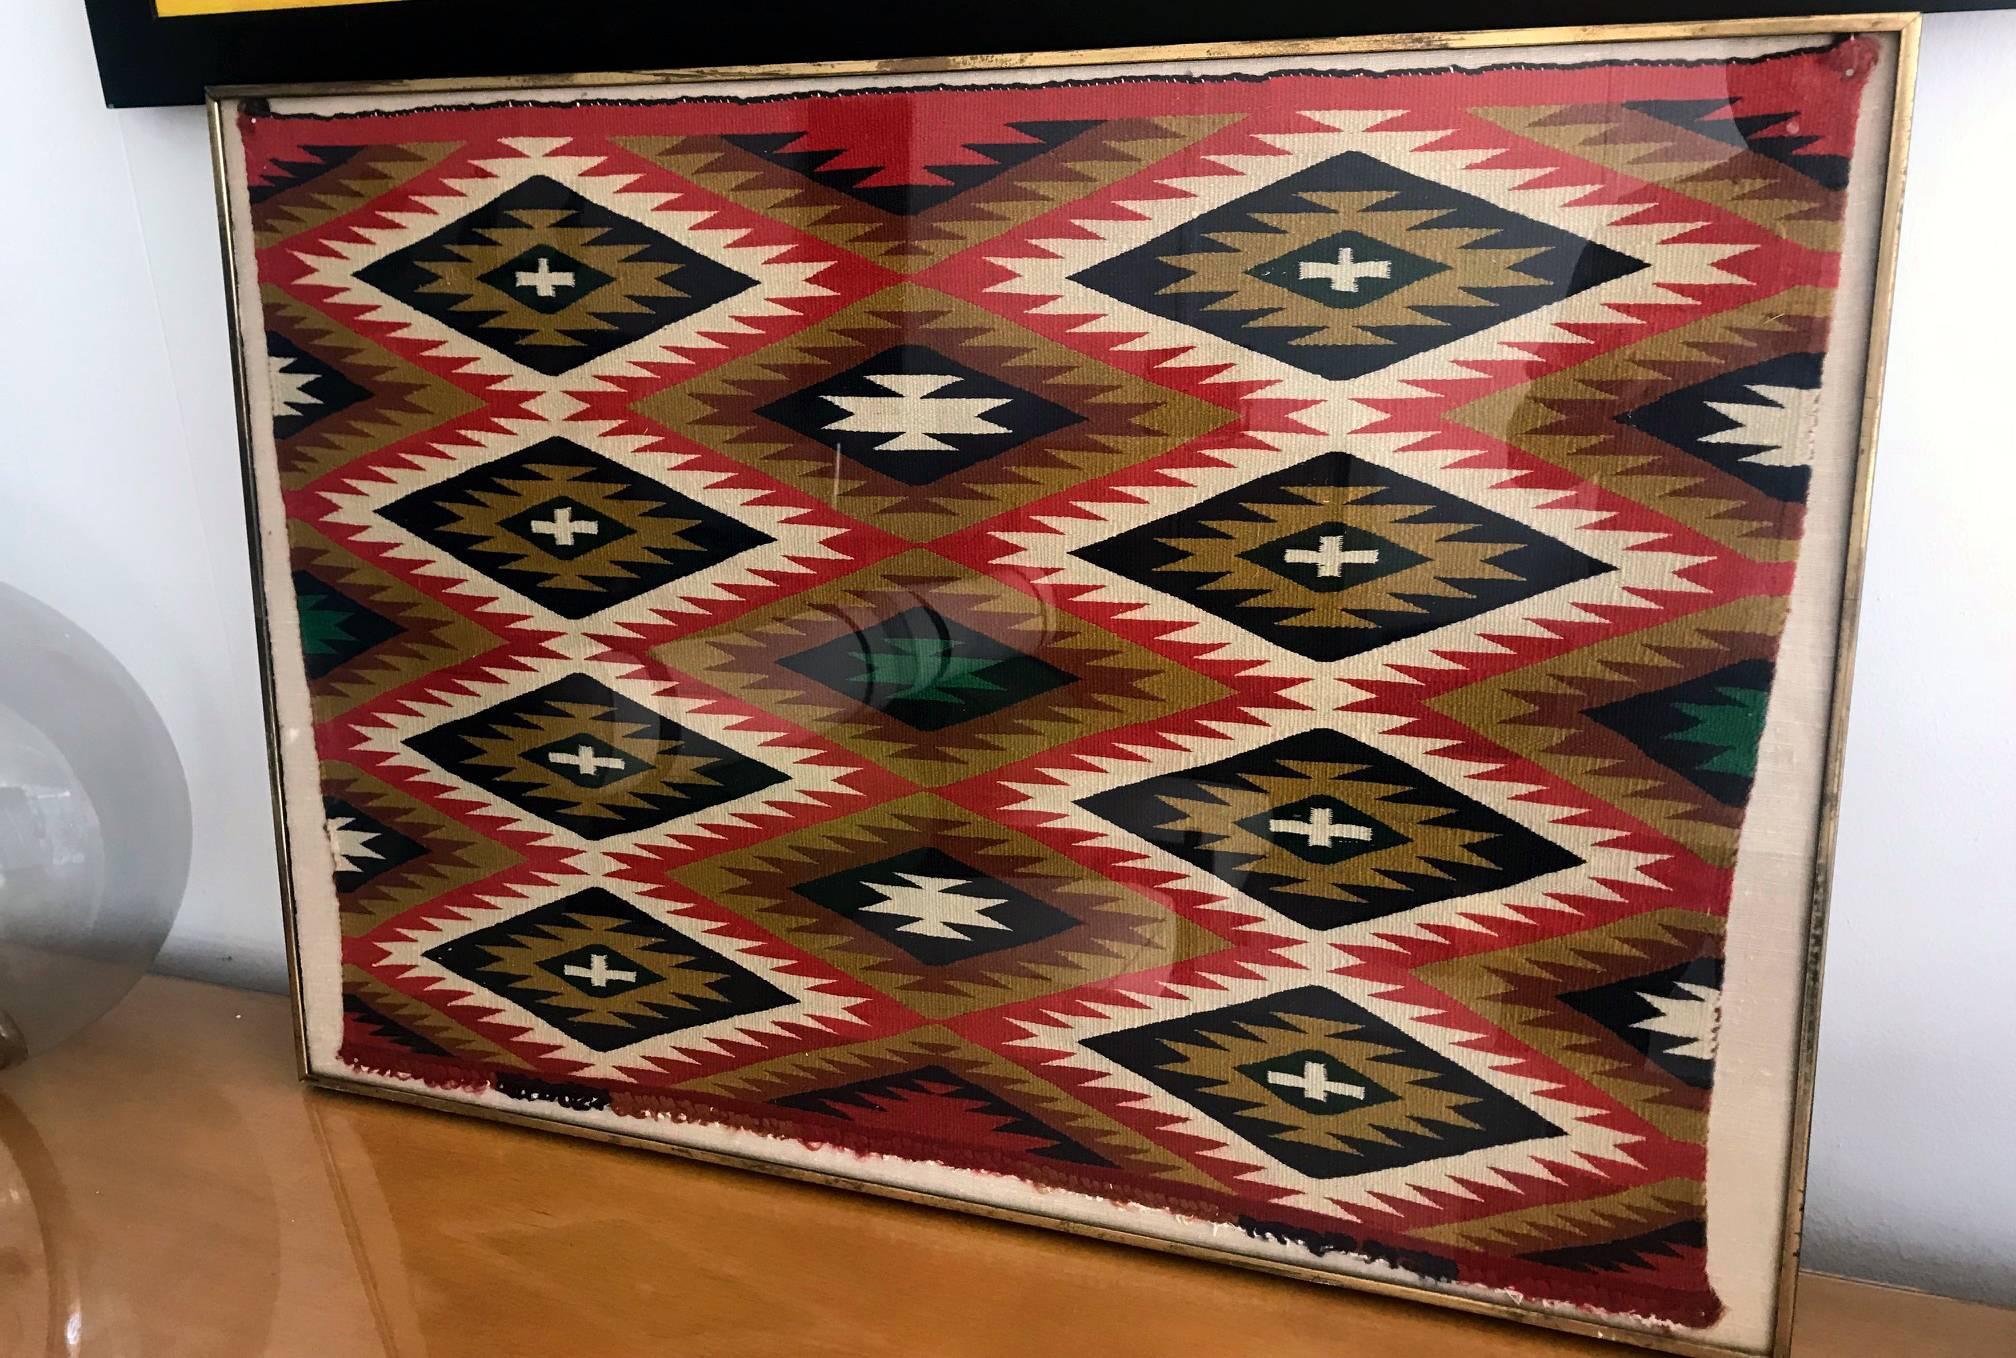 A framed Navajo Germantown weaving in an eye dazzle style, very tightly woven with commercial Germantown PA yarns in multiple shades of red, green, blue and brown. Intended as a small saddle cover or sampler for historical tourists. High quality and